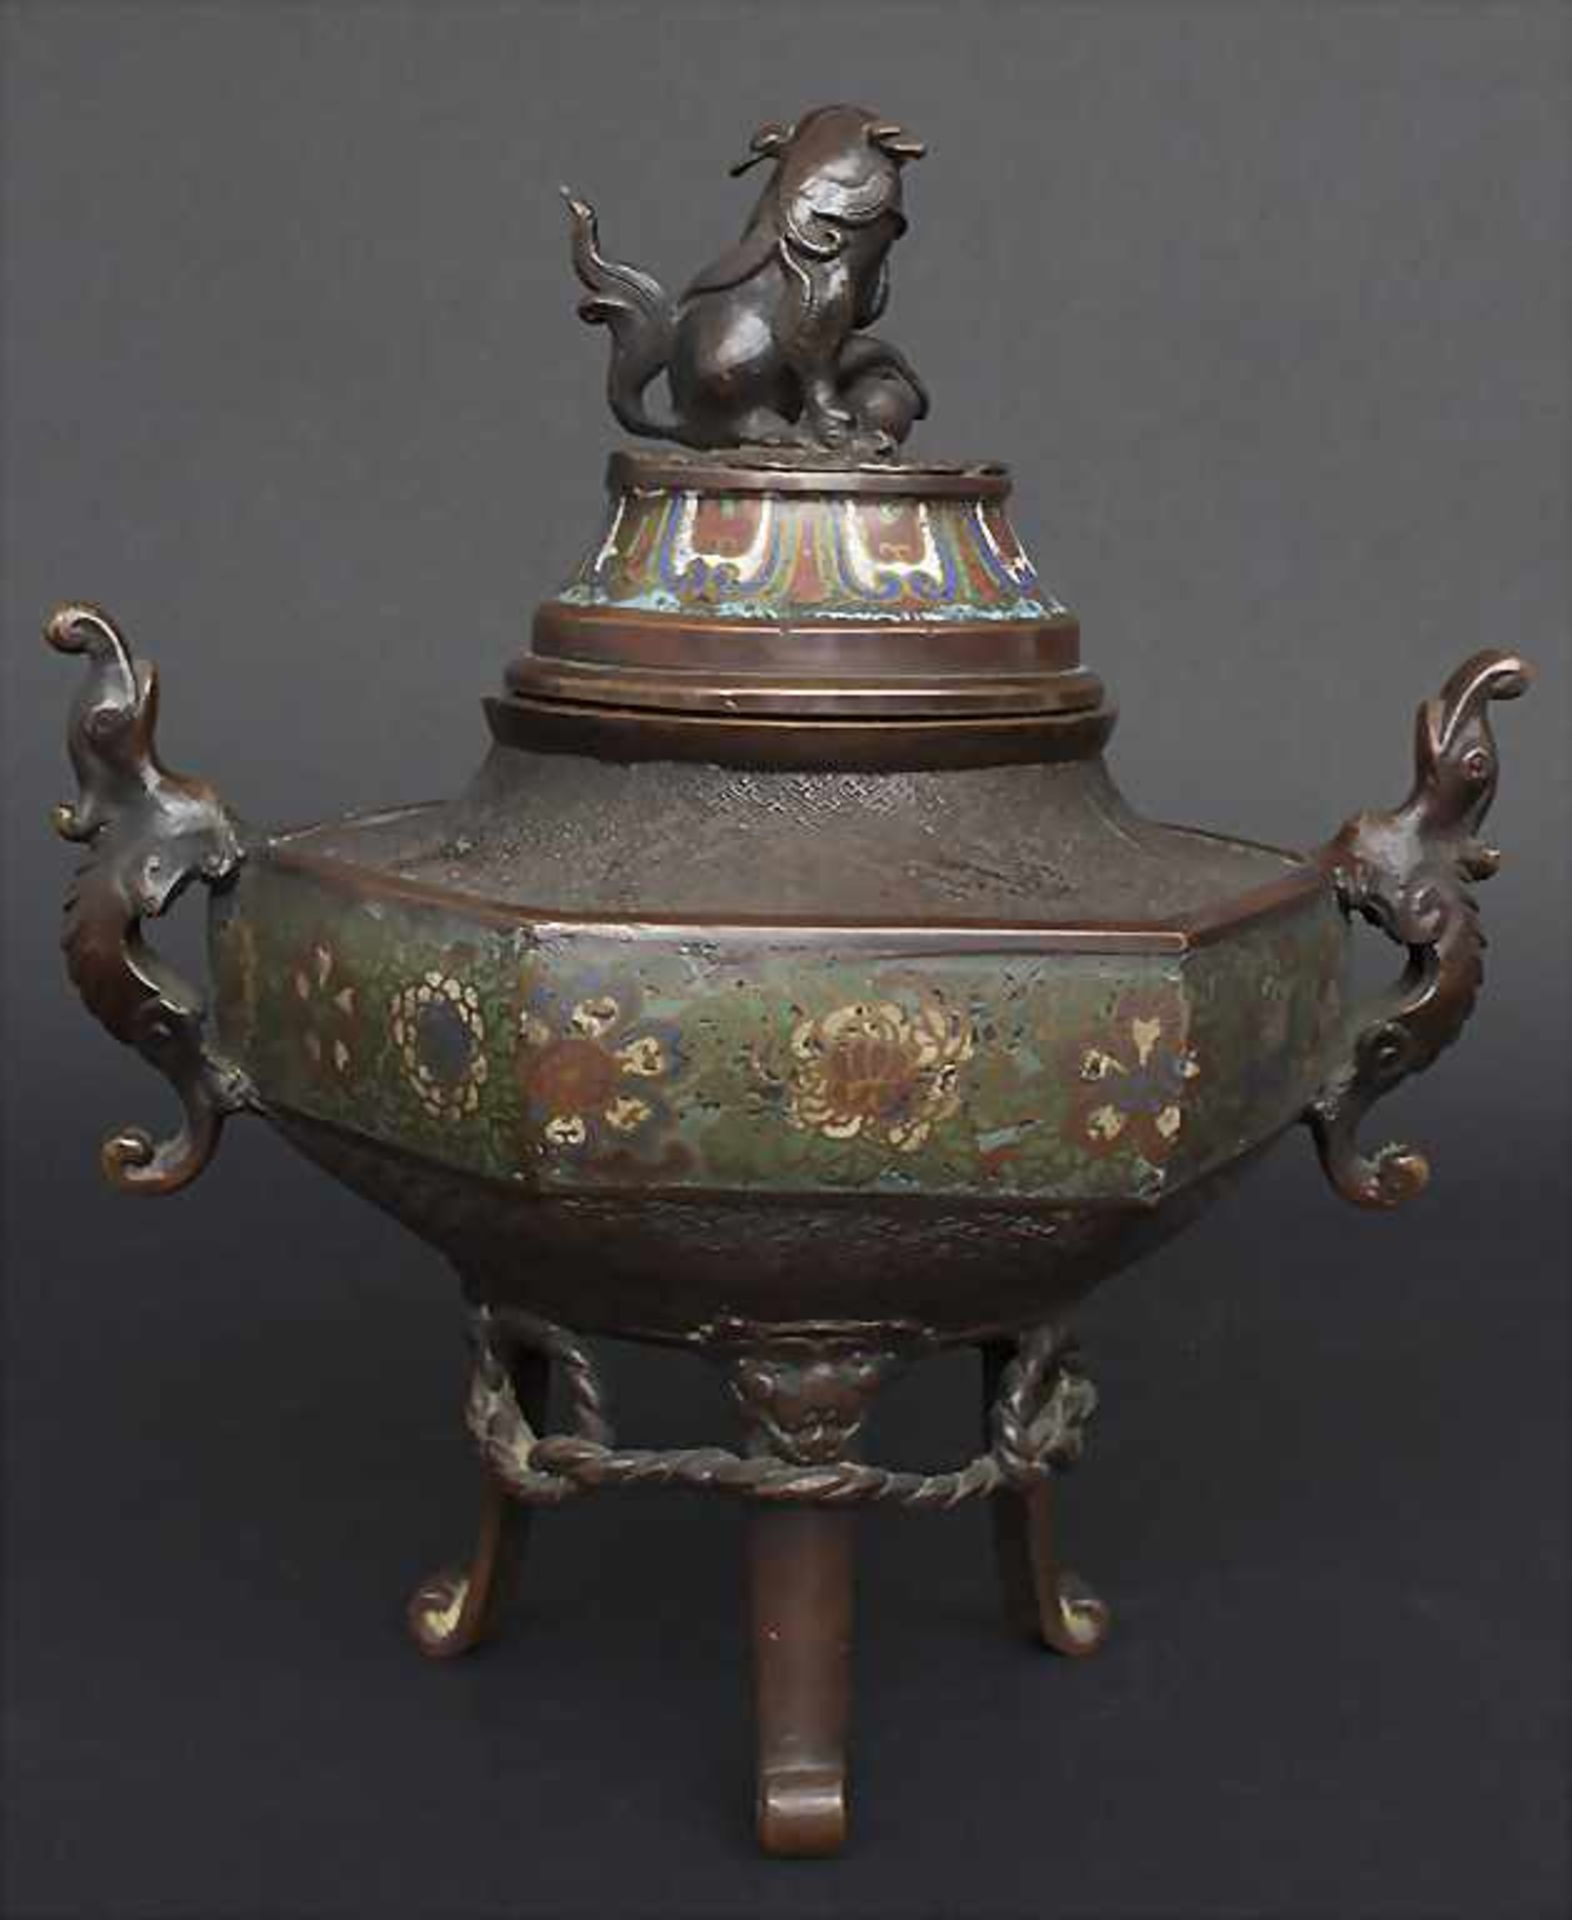 Cloisonné Weihrauchbrenner mit Shishi / A Cloisonné incense burner with Shishi, China, 19. Jh. - Image 3 of 8